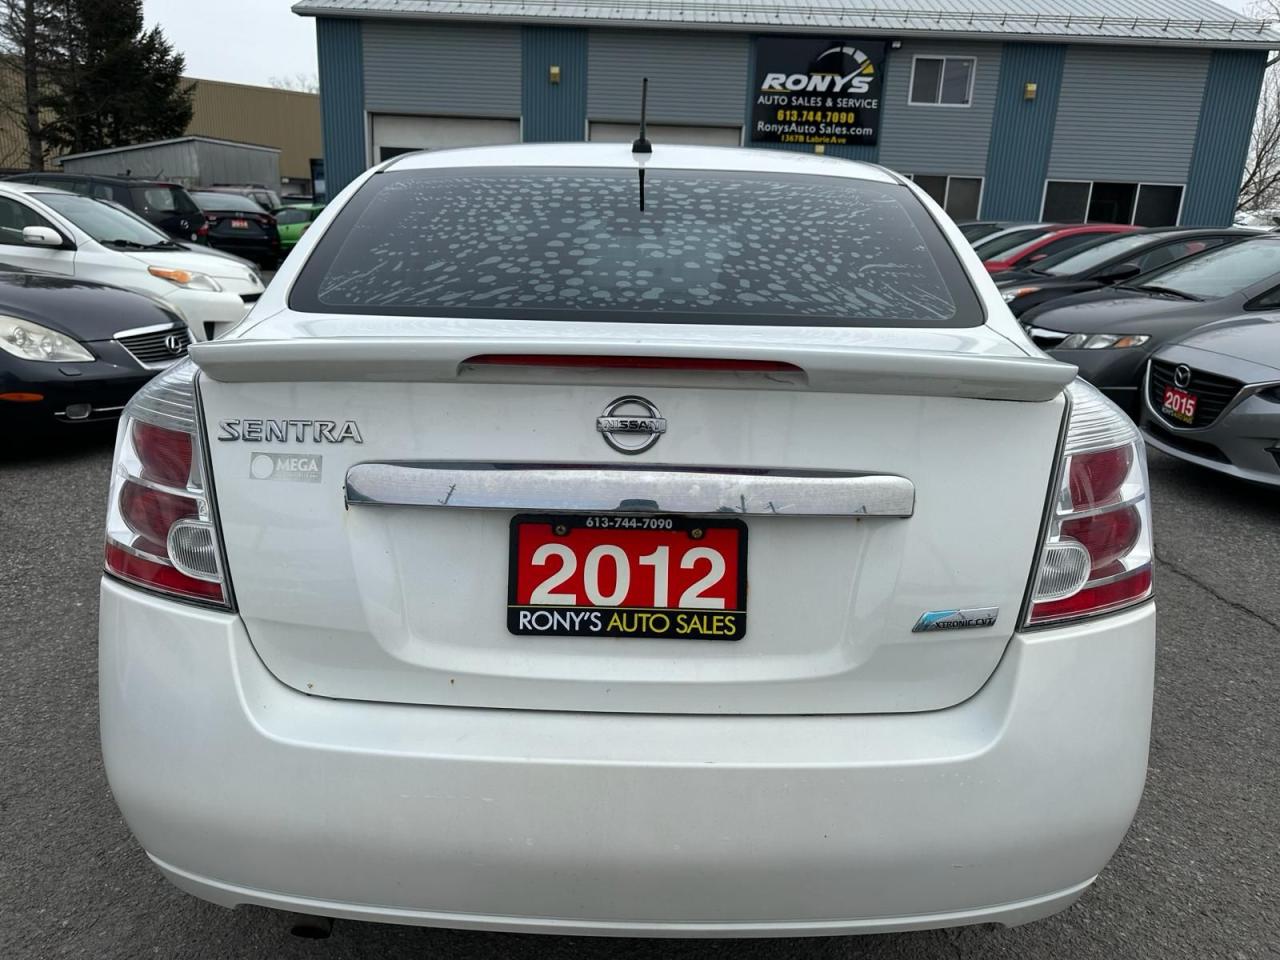 2012 Nissan Sentra AUTOMATIC, ACCIDENT FREE, A/C, POWER GROUP, 144 KM - Photo #5